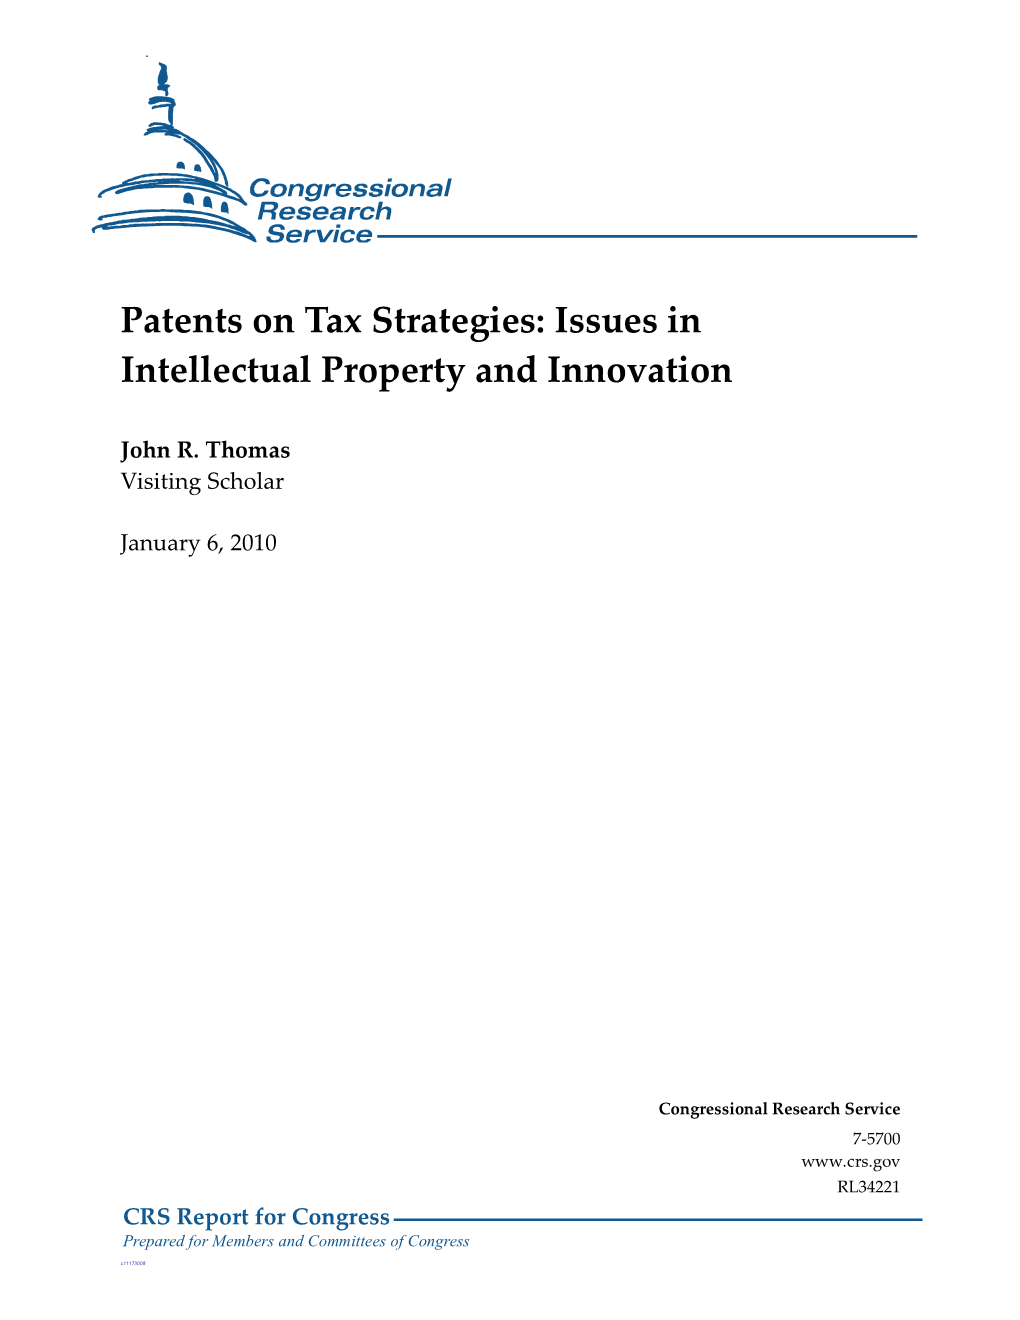 Patents on Tax Strategies: Issues in Intellectual Property and Innovation